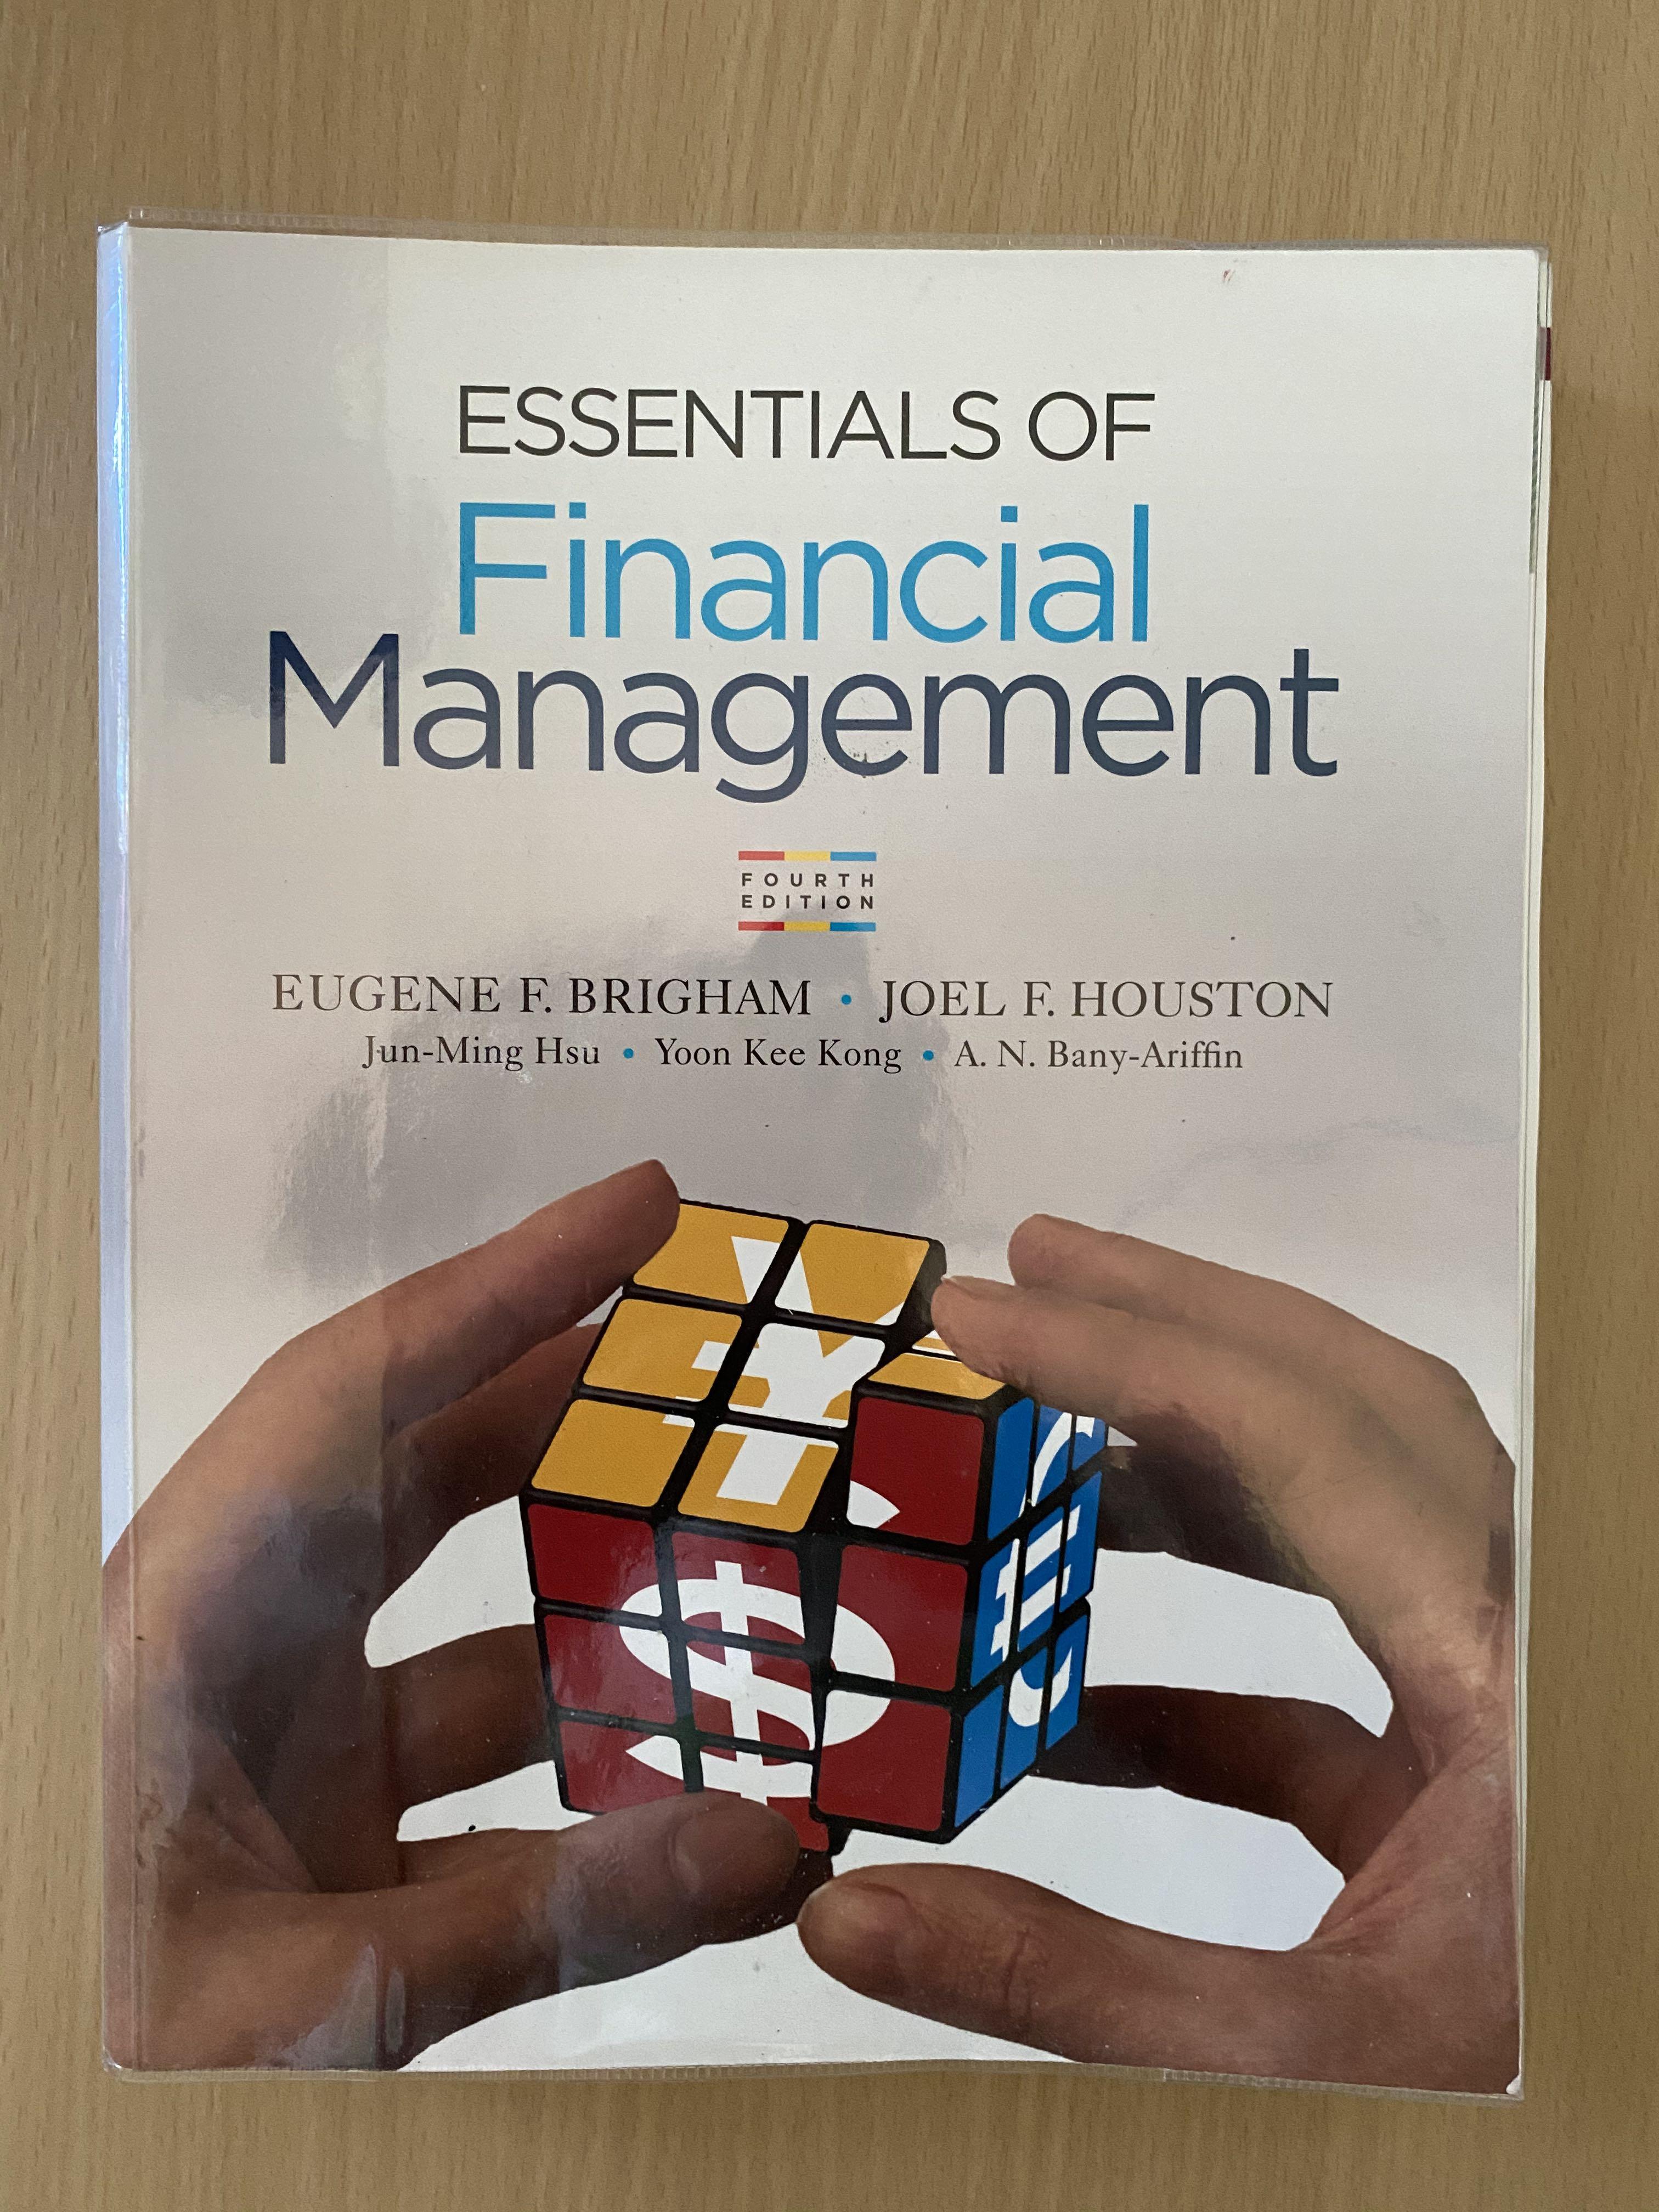 article review of financial management